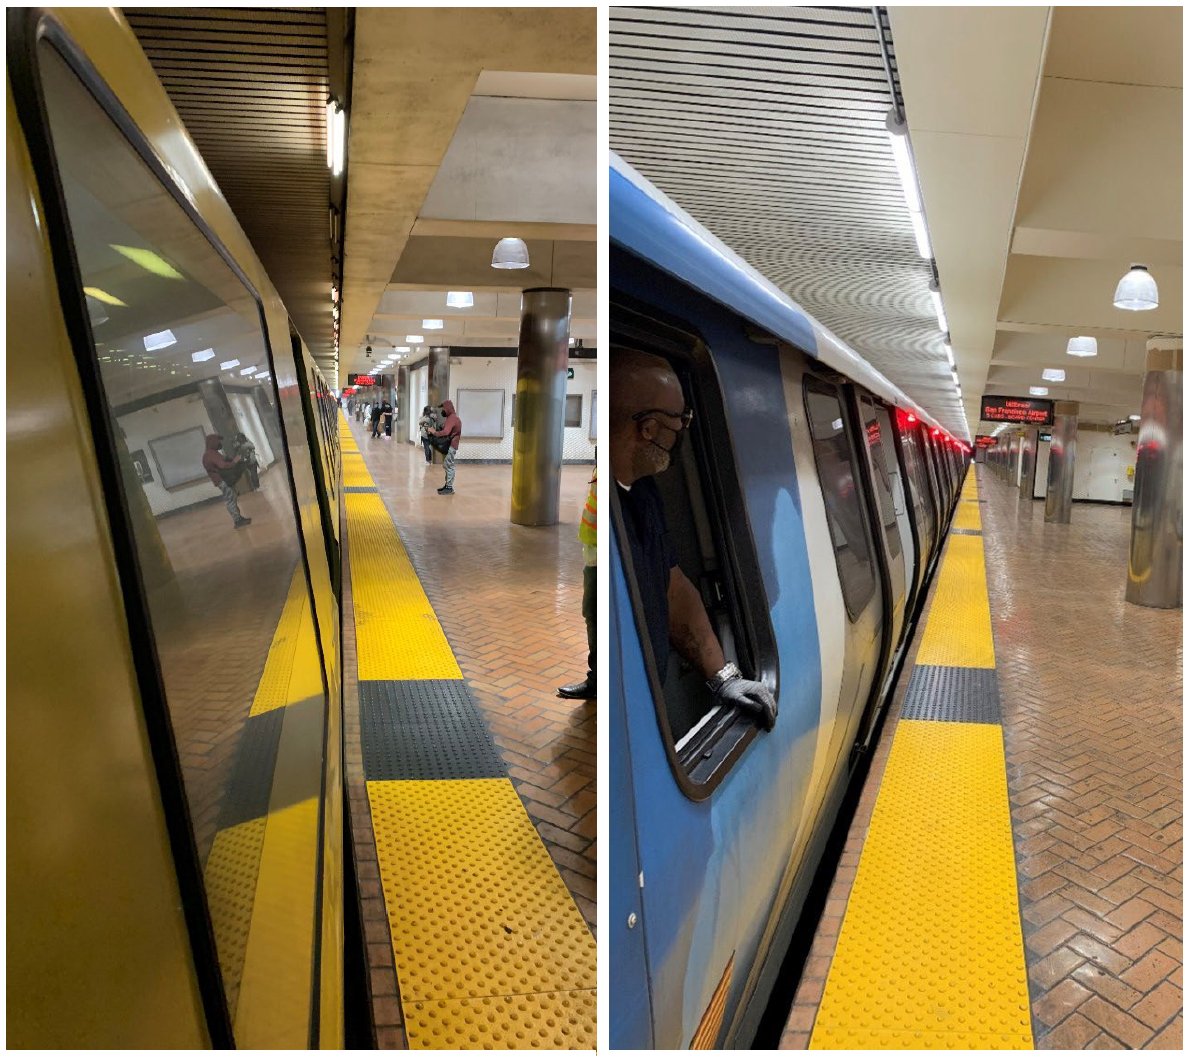 Powell St. Station platform before and after  completion of lighting improvements